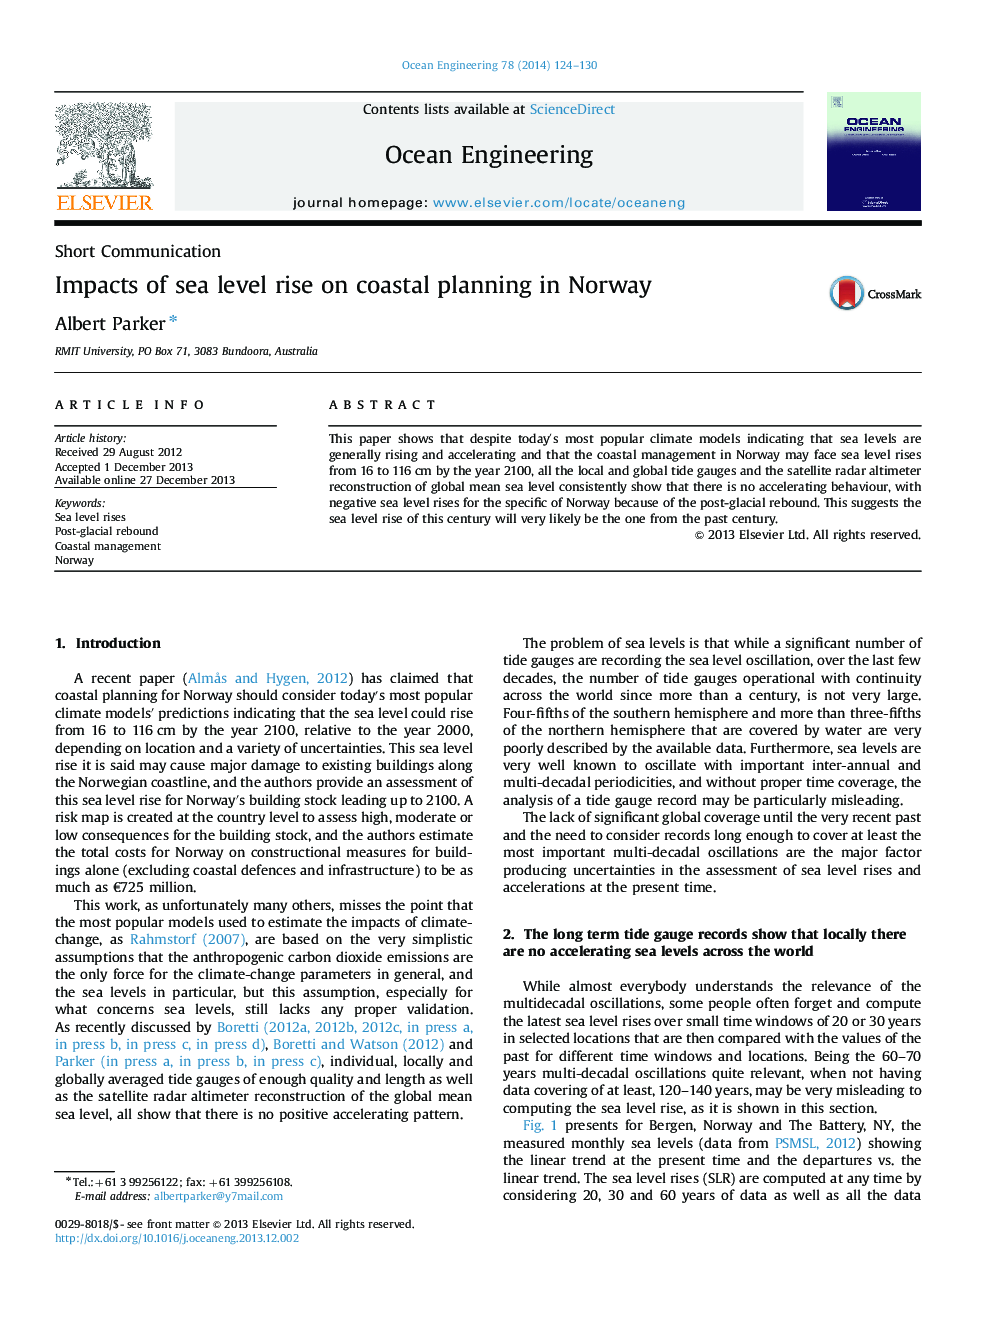 Impacts of sea level rise on coastal planning in Norway